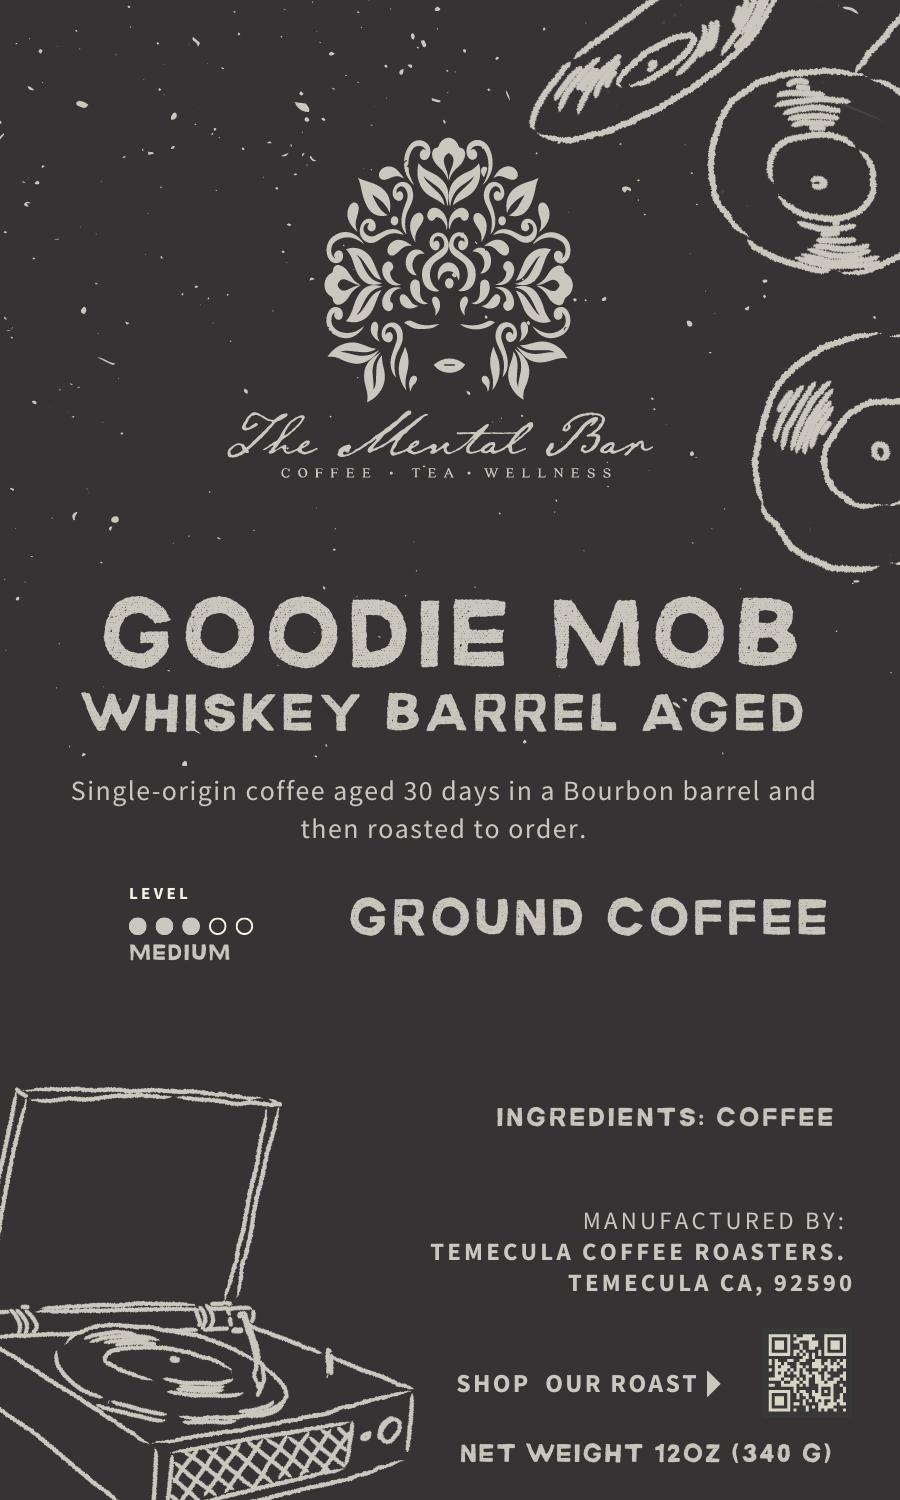 Goodie mob (Whiskey Barrel Aged)